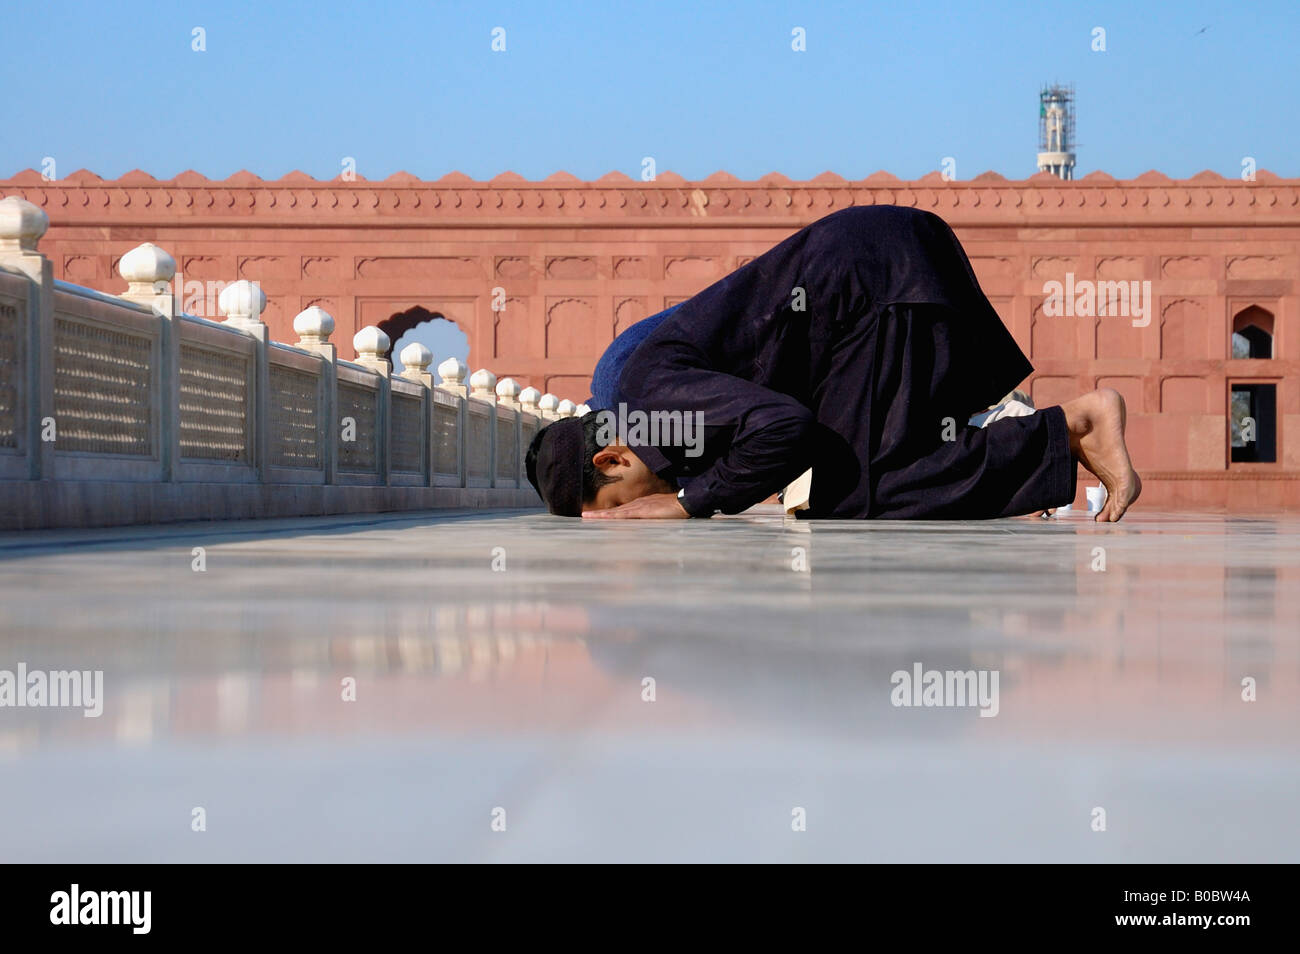 Badshahi Mosque stands across the Hazuri Bagh from Lahore Fort. Pakistan. Muslim worshippers. Stock Photo